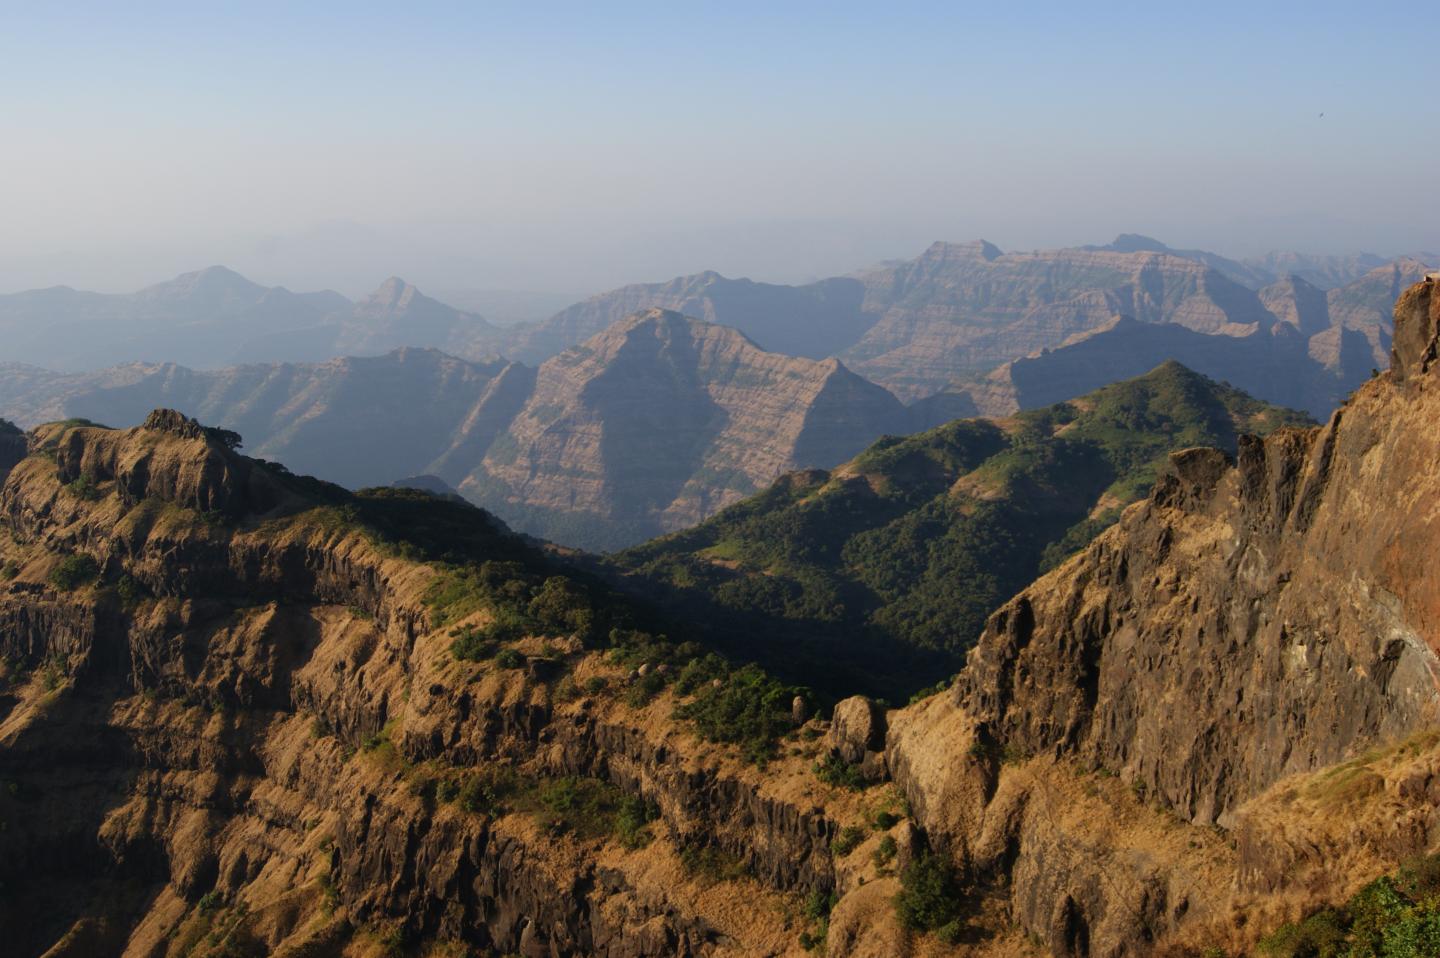 The Deccan traps are an area of igneous rock in India that formed during a time of intense volcanic activity about 65 million years ago. Image Credit: Gerta Keller, Department of Geosciences, Princeton University